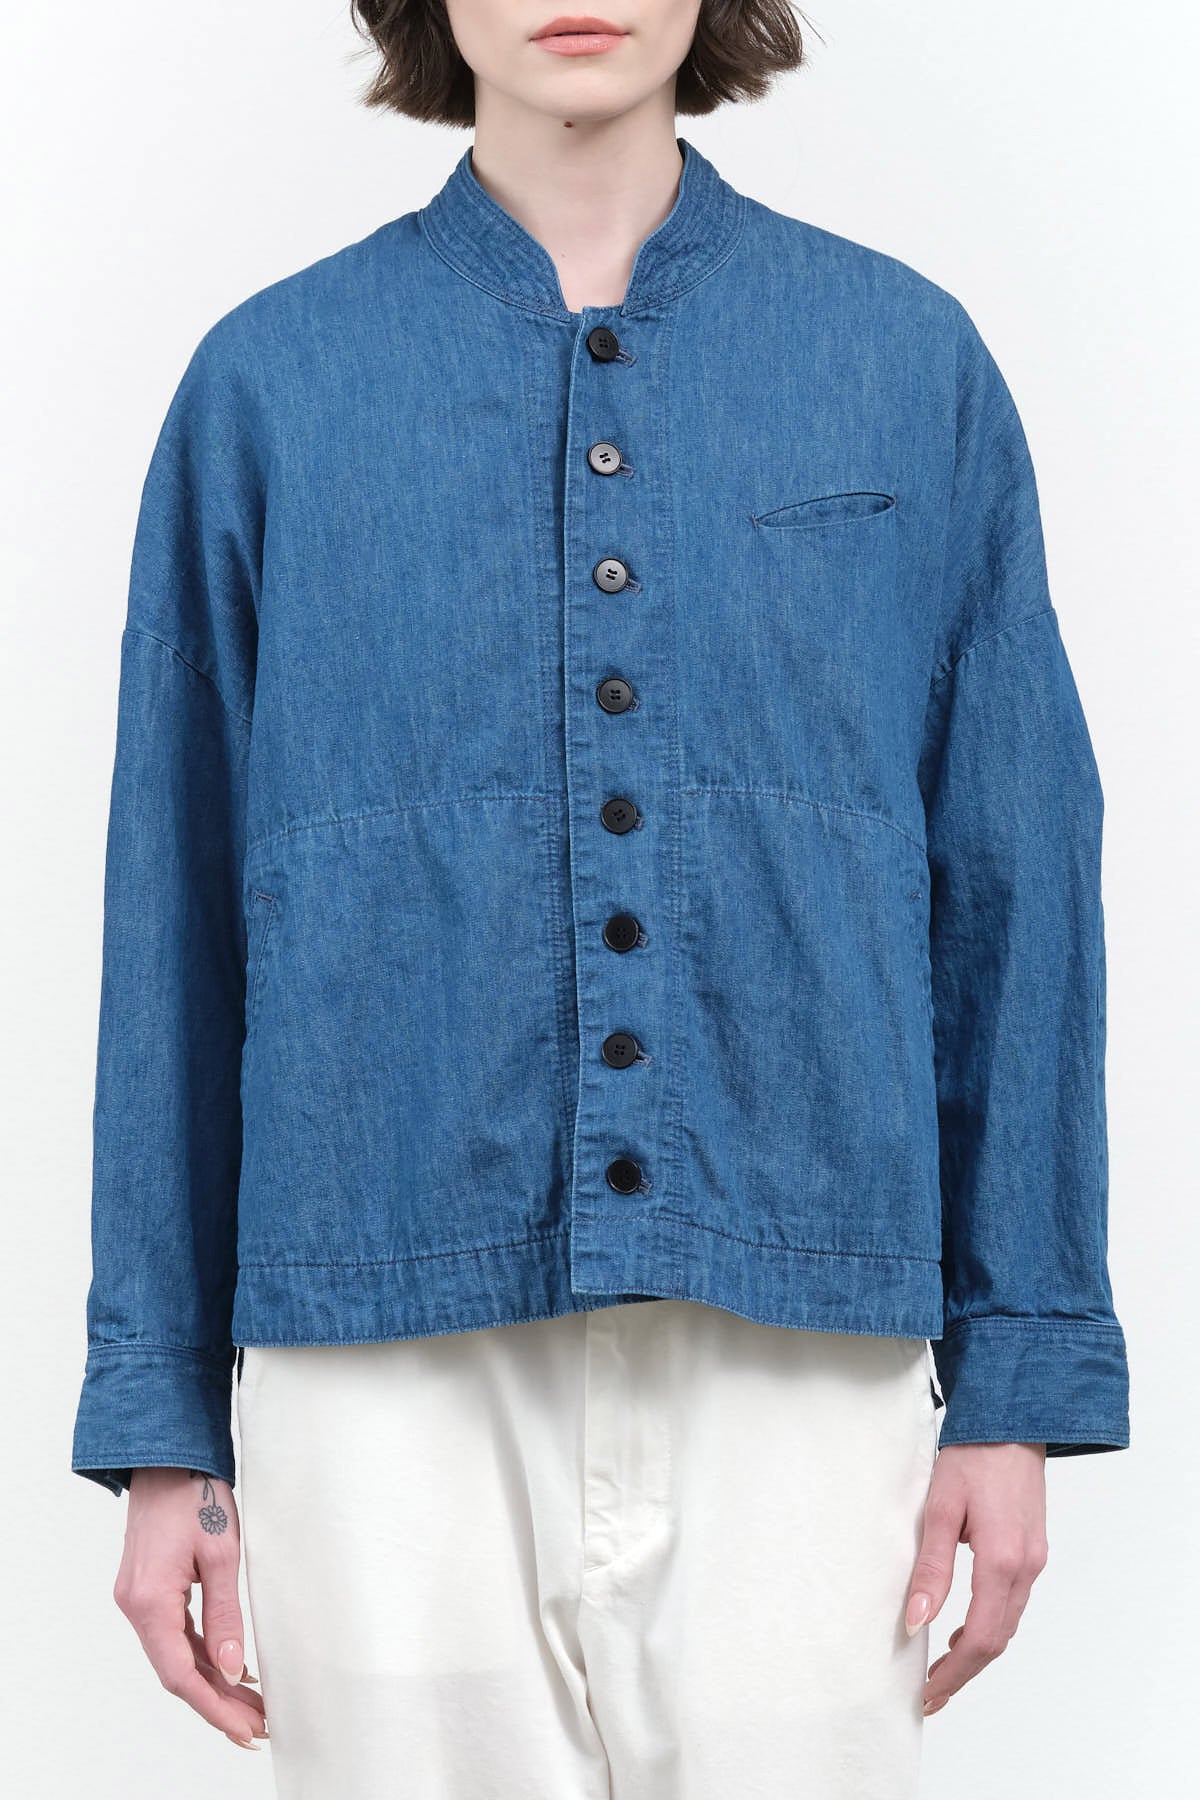 Front buttoned view of Denim Coverall Jacket